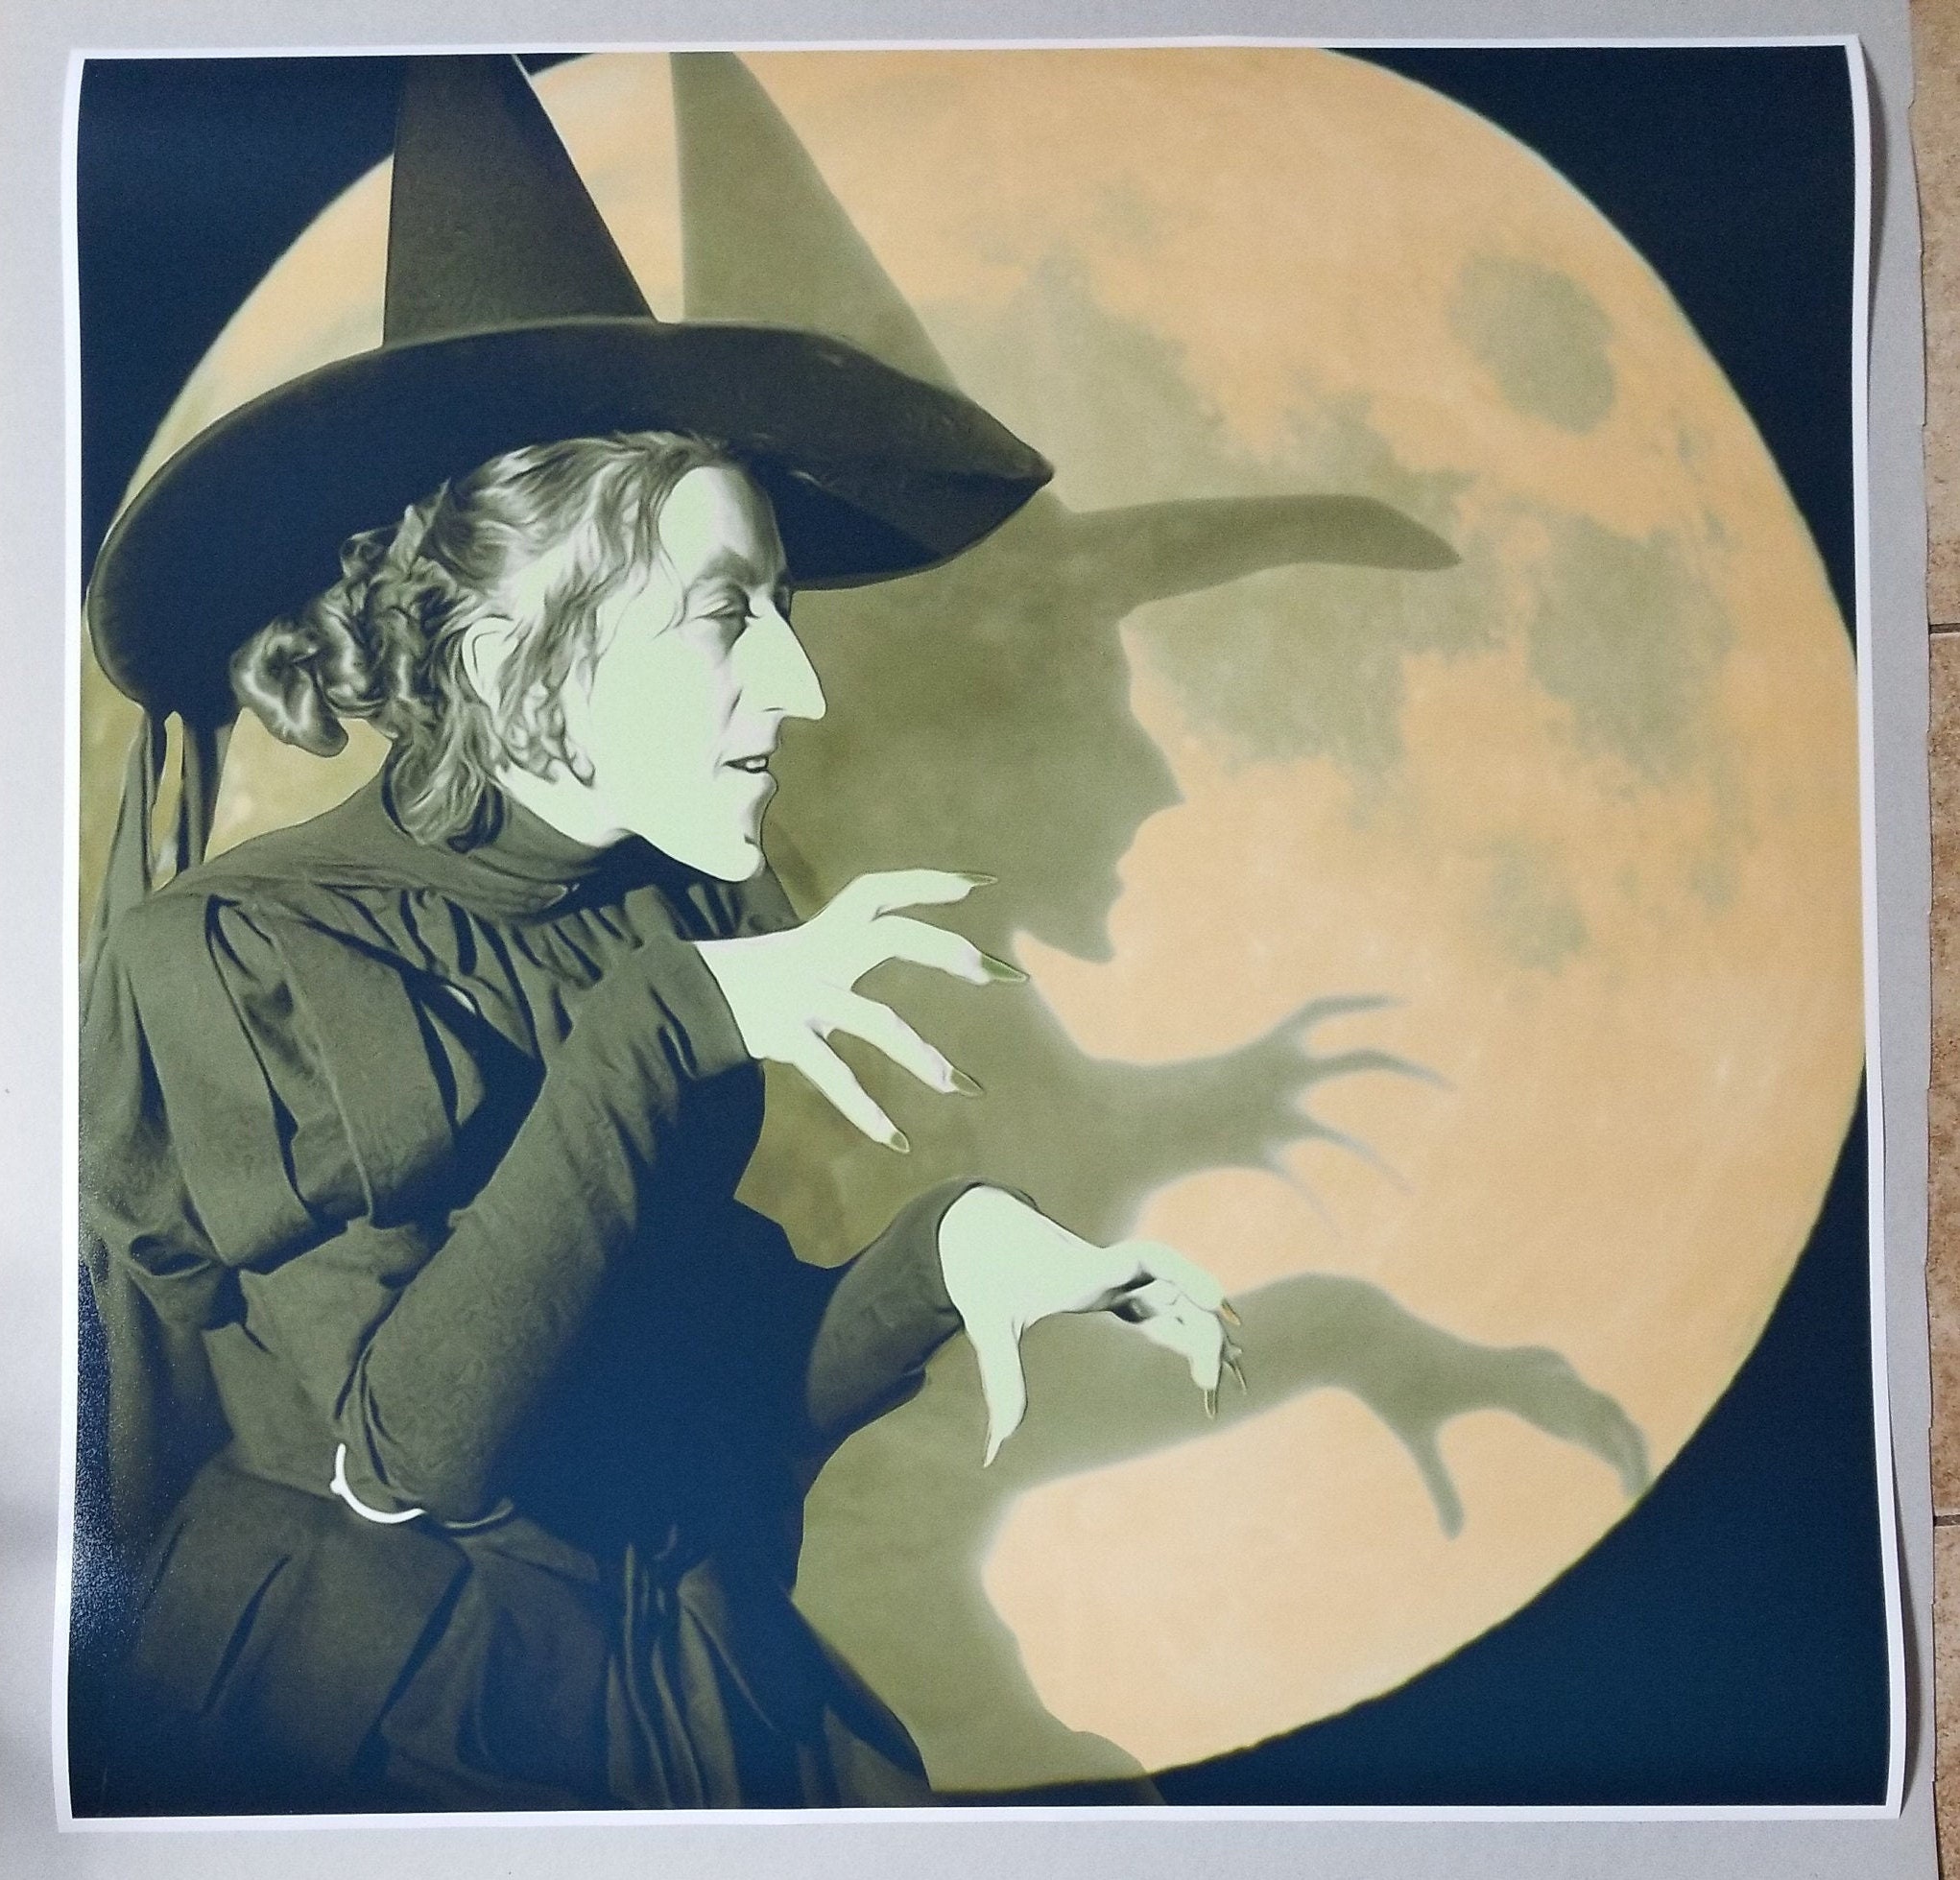 The Wizard Of Oz Wicked Witch Of The West Diamond Painting 